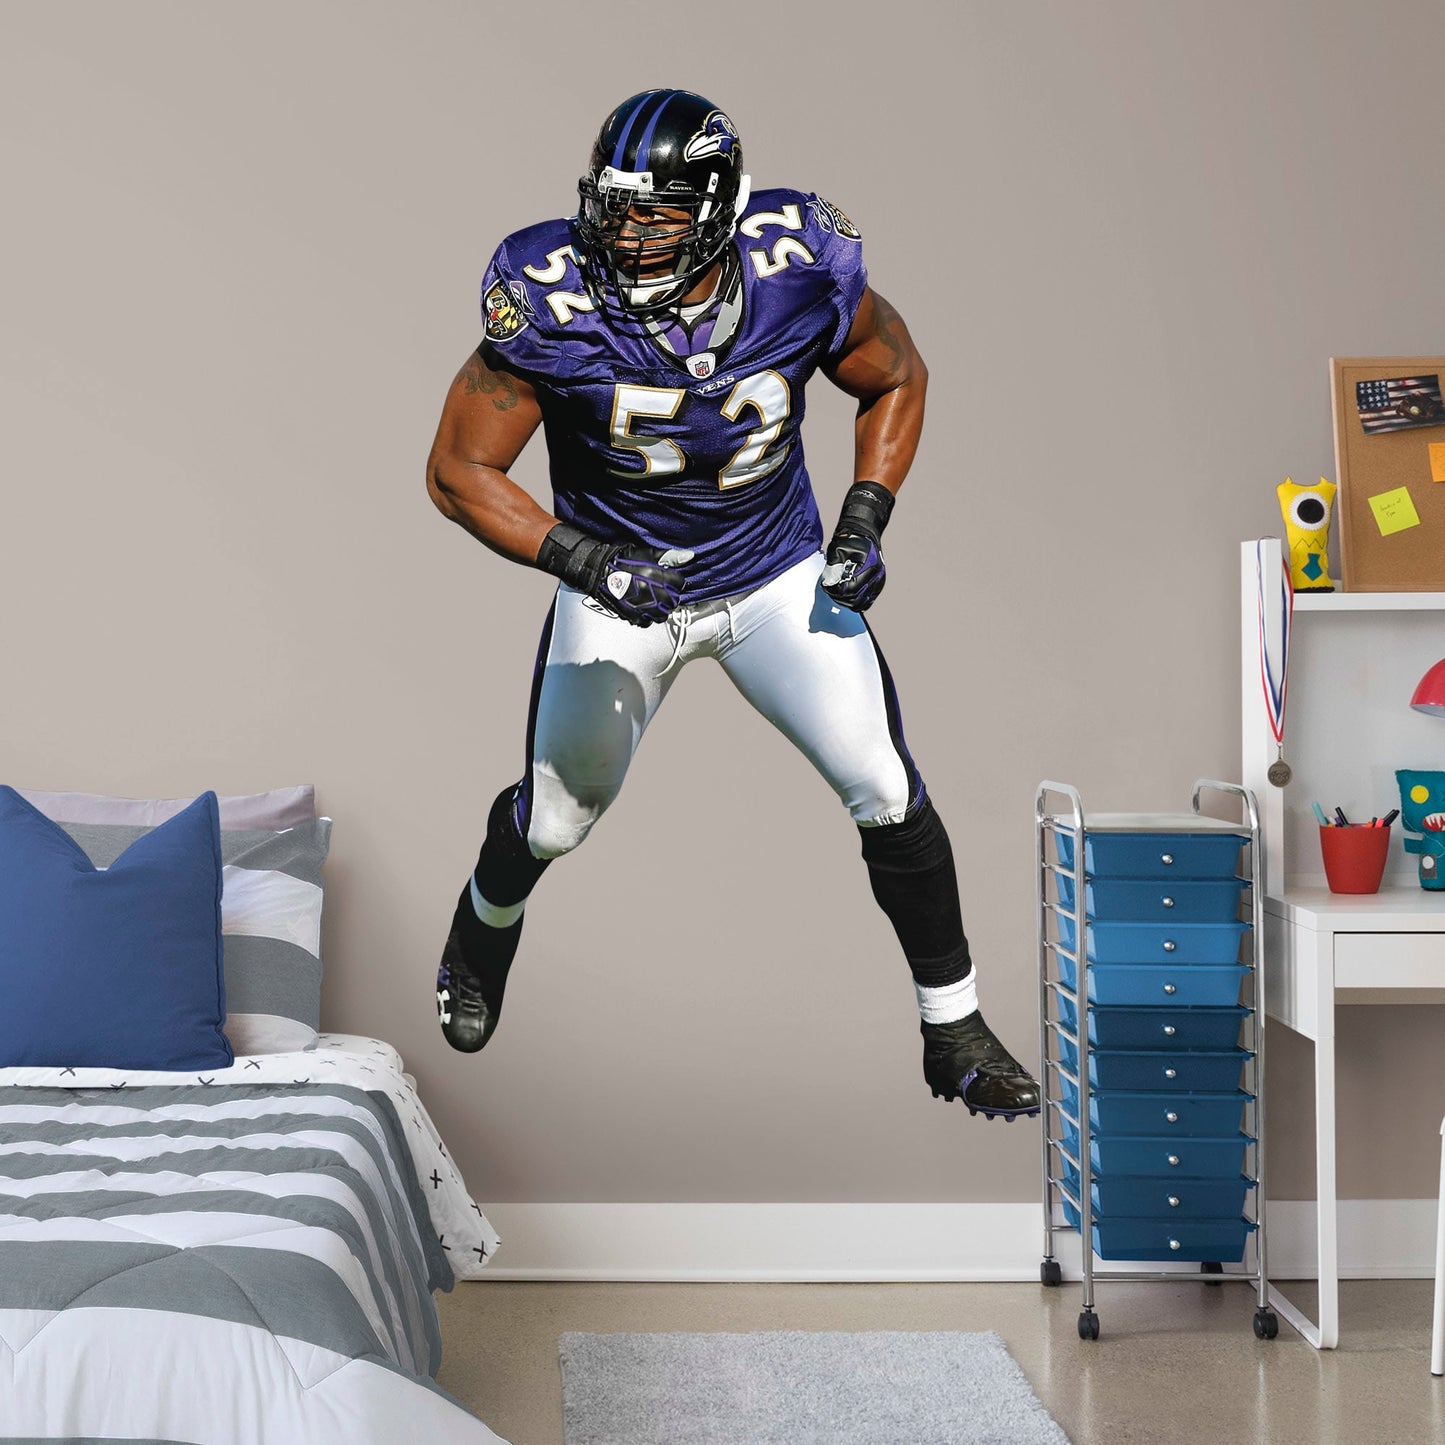 Life-Size Athlete + 2 Decals (47"W x 78"H) He’s the second linebacker ever to win the NFL’s Super Bowl MVP Award, and now, Brickwall, a.k.a. Ray Lewis, is ready for the bedroom, living room or locker room. This rugged, removable wall decal features the full figure of two-time Super Bowl champion No. 52 in his black, purple and metallic gold Baltimore Ravens best. Go Ravens!